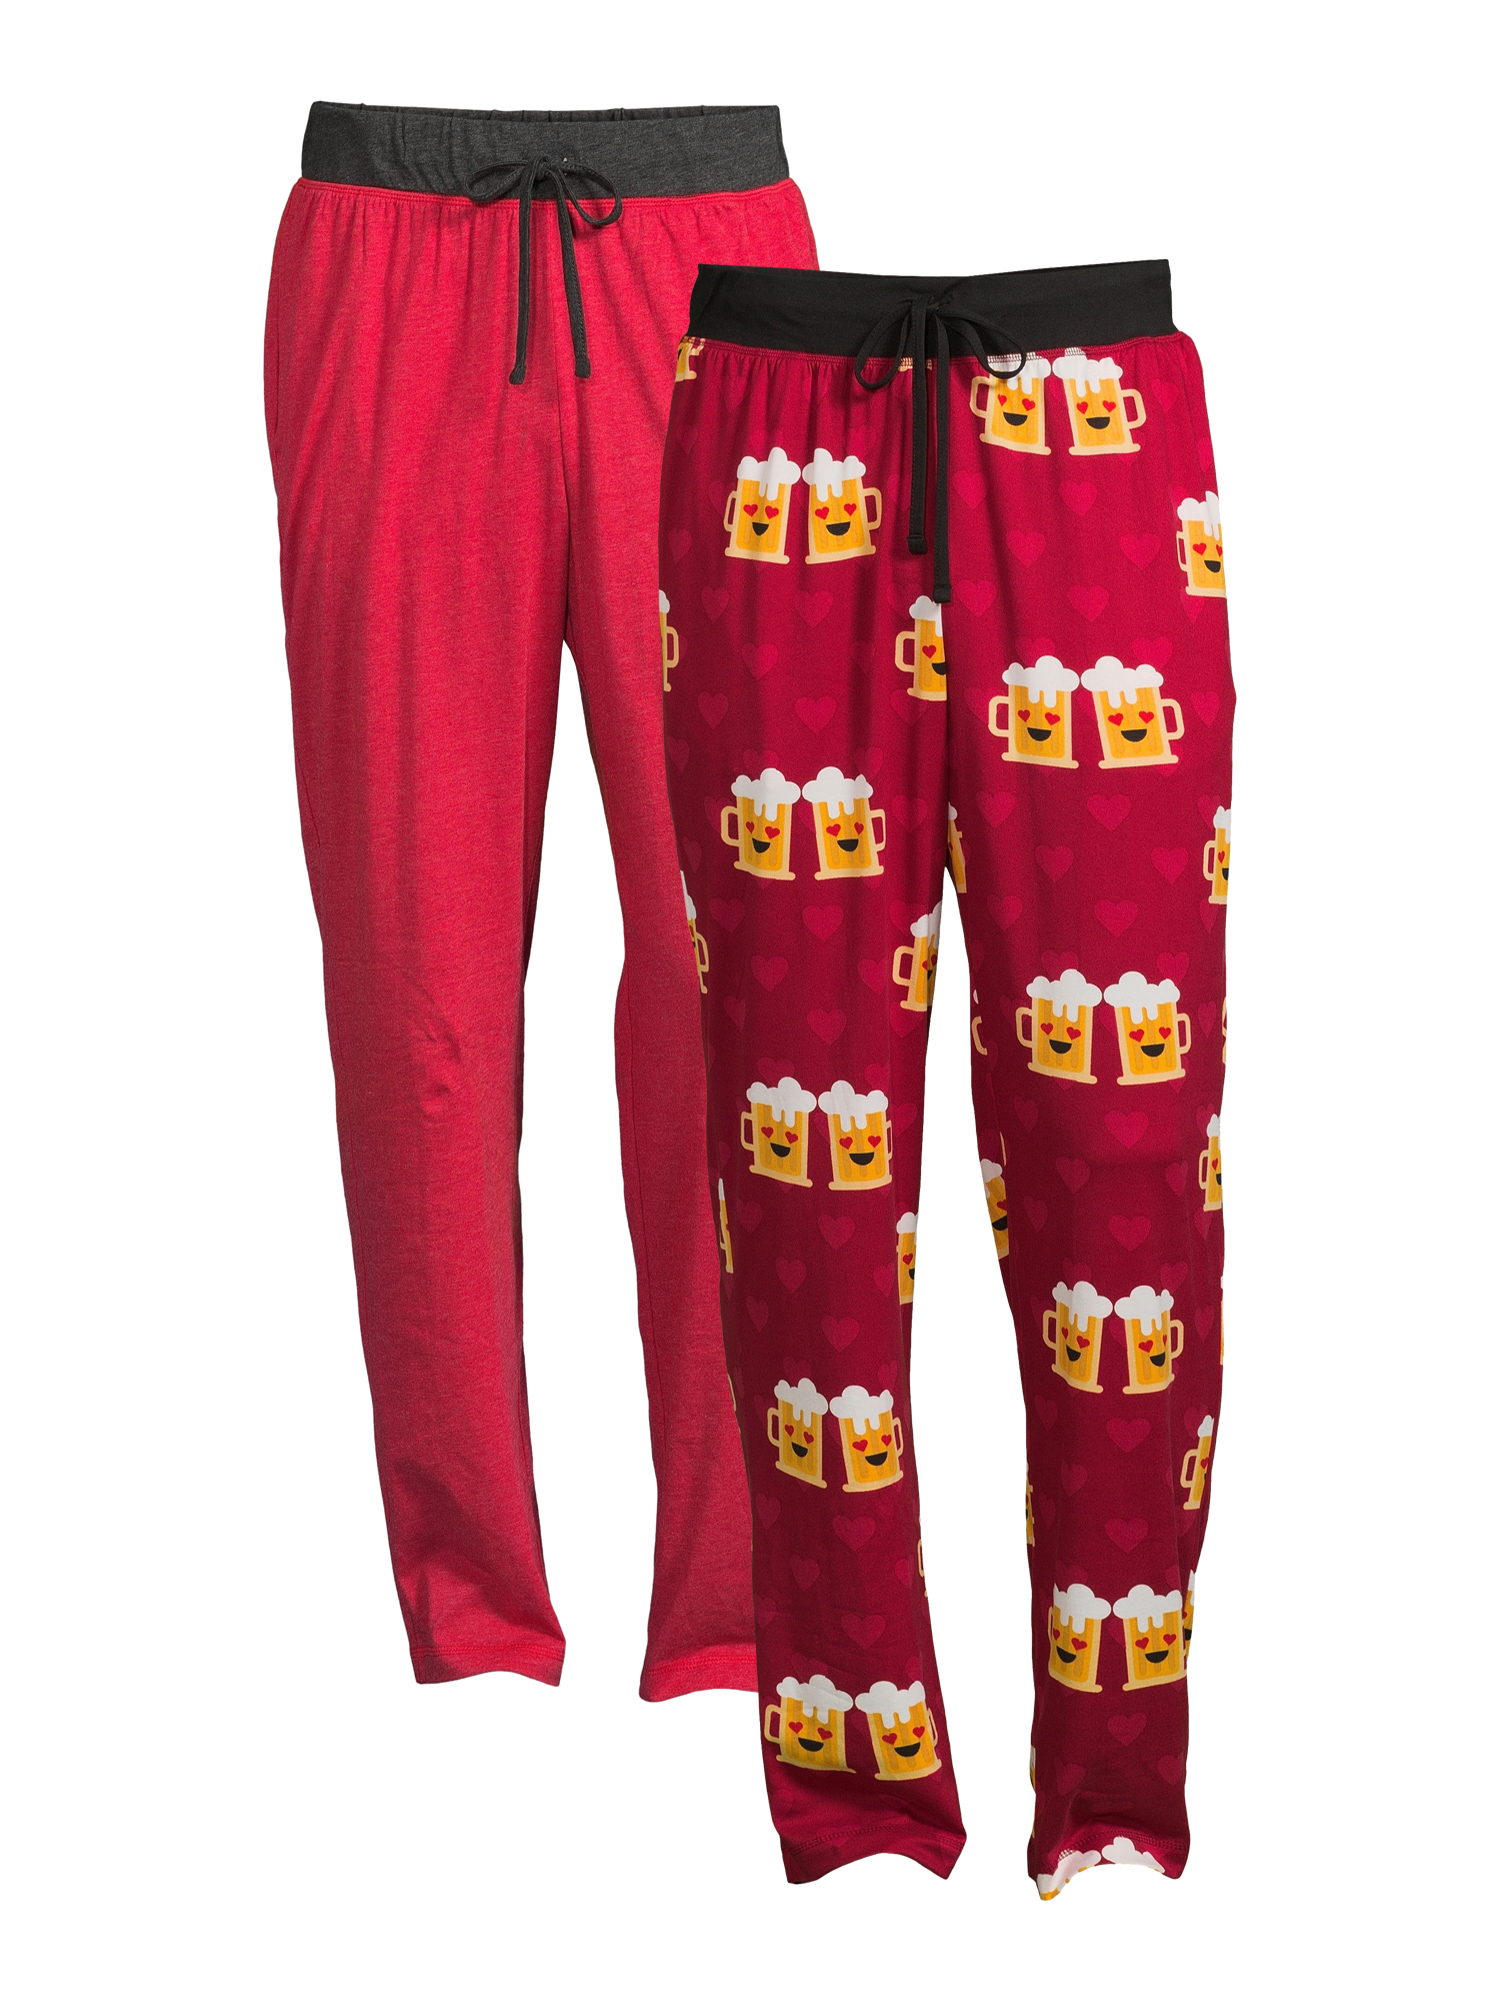 Valentine's Day Men's and Big Men's Sleep Pants, 2-Pack, Heather Red and Match Made Beer Designs - image 1 of 5